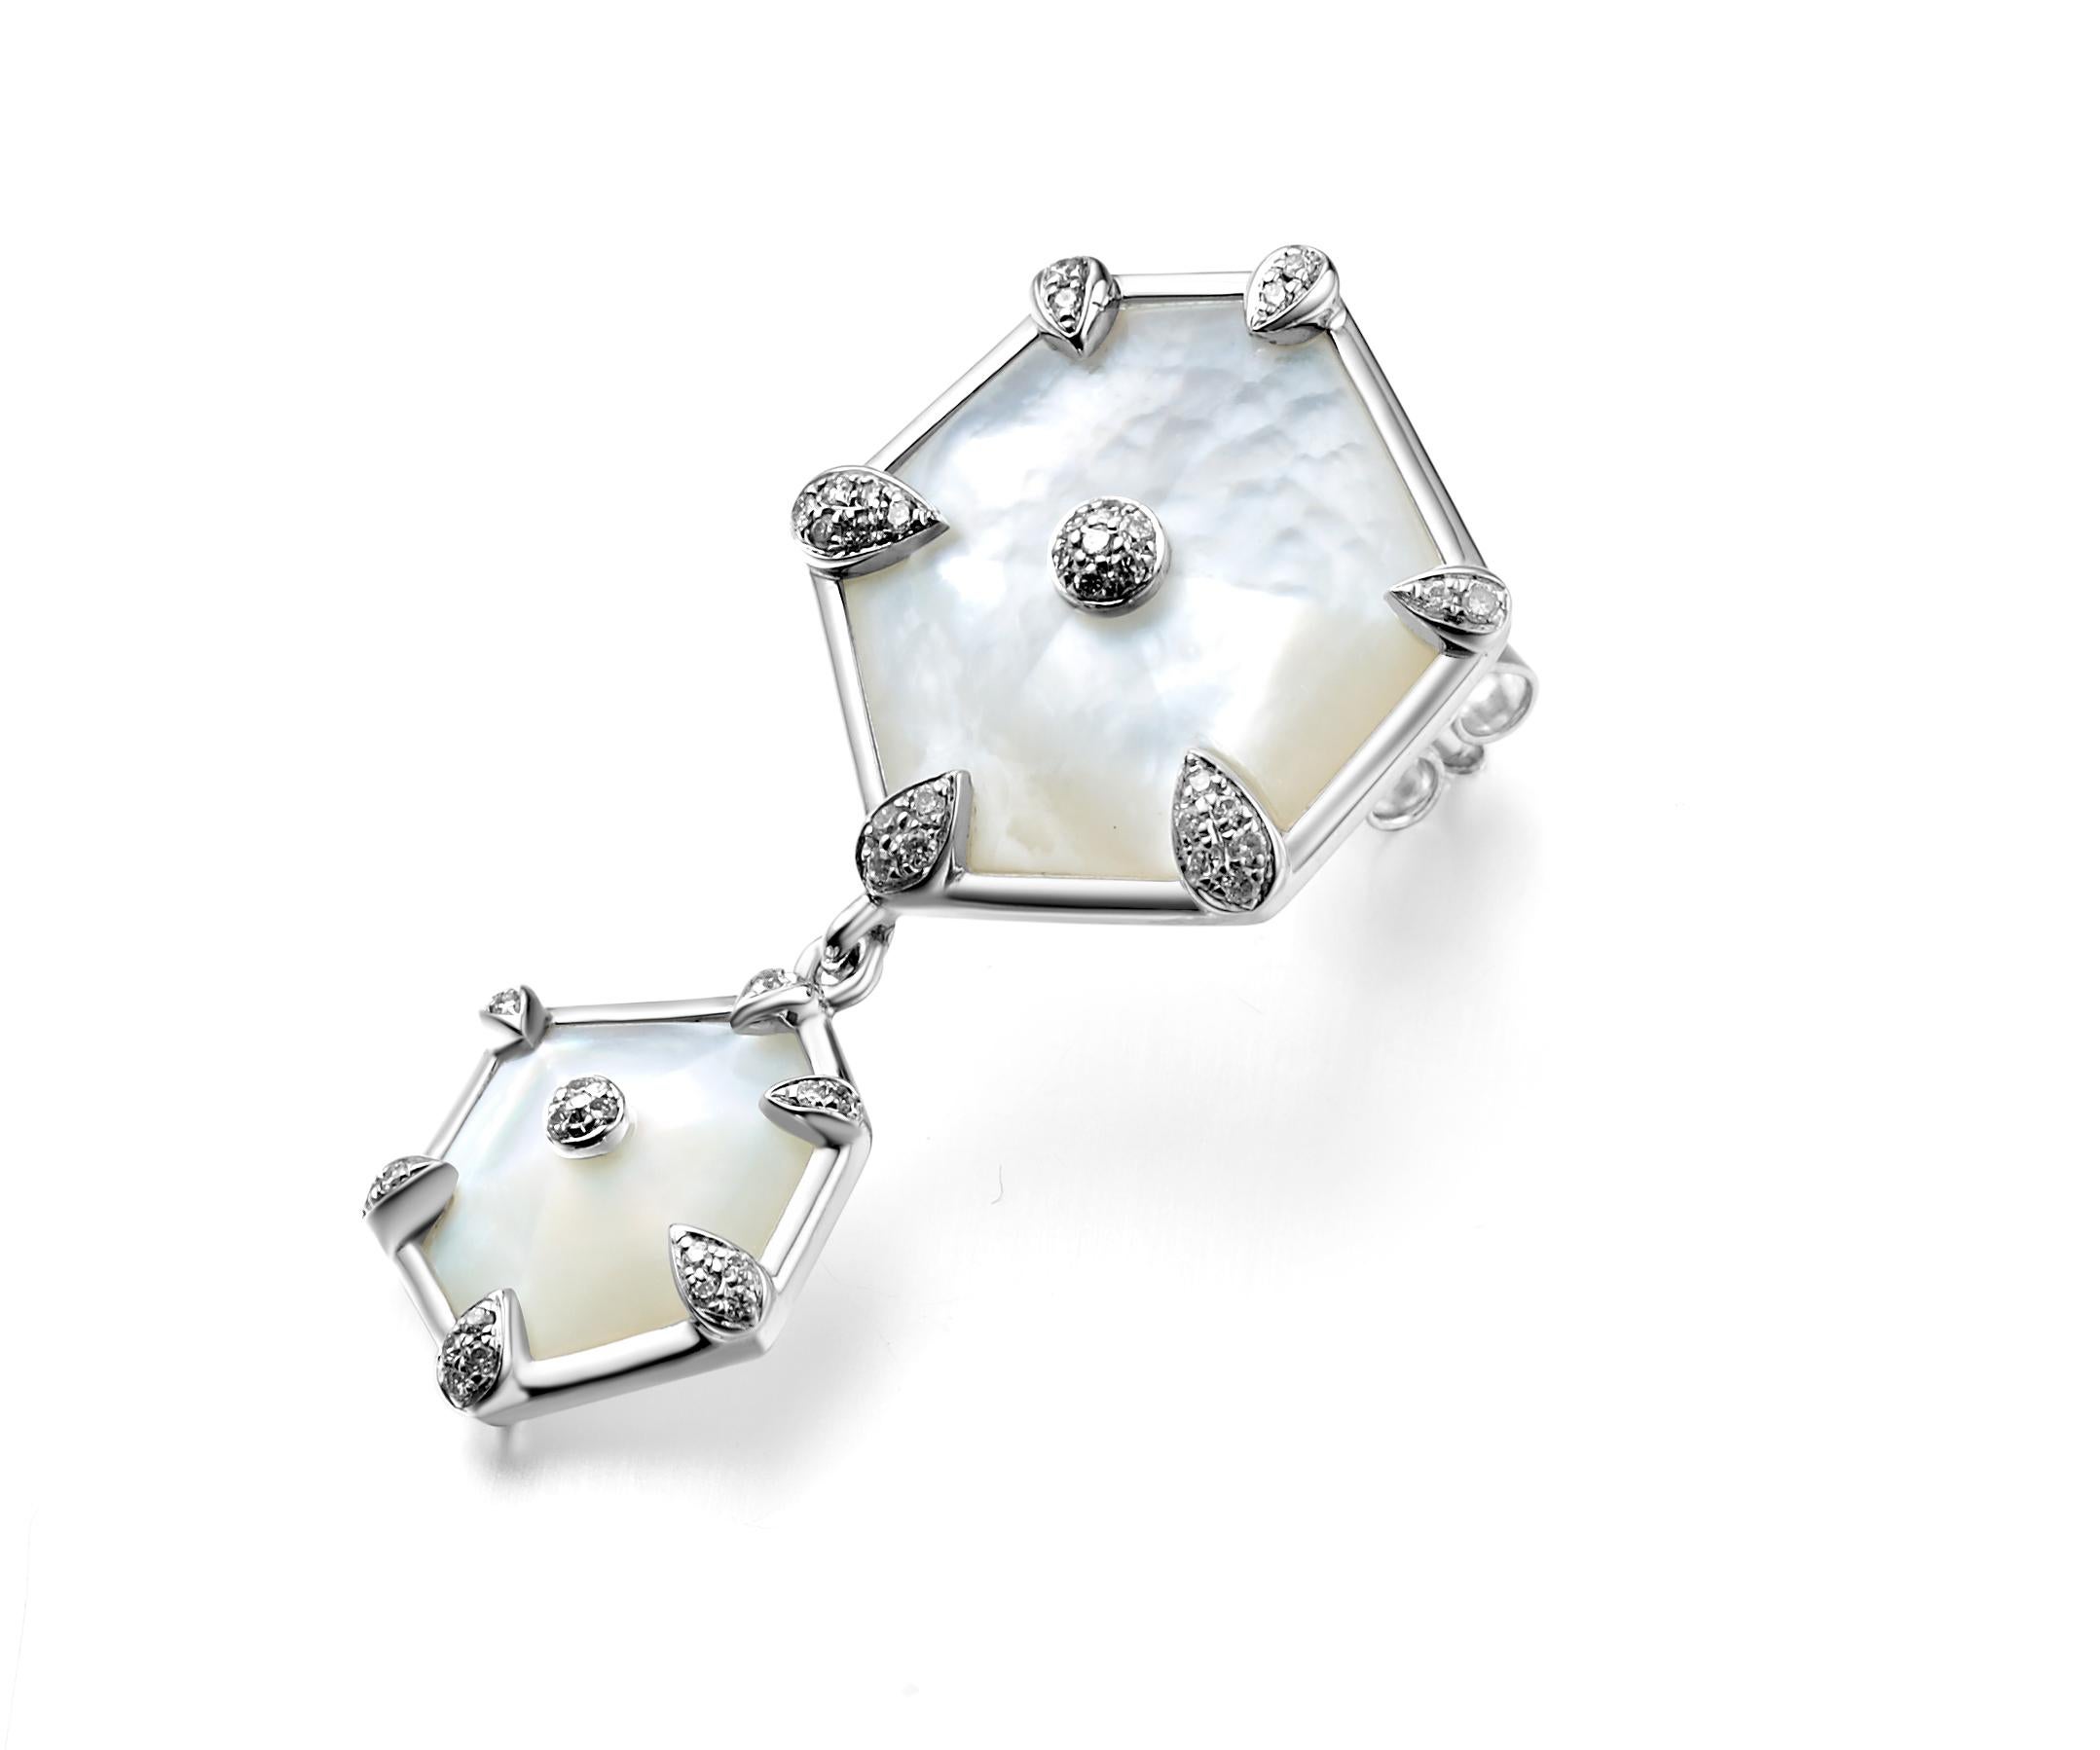 Description:
Nova hexagon stud drop earrings 0.268ct white diamonds and 10ct mother of pearl, set in 18ct white gold with a high polish.

Inspiration
The Nova Collection embodies the essence of freedom and having the courage to explore new